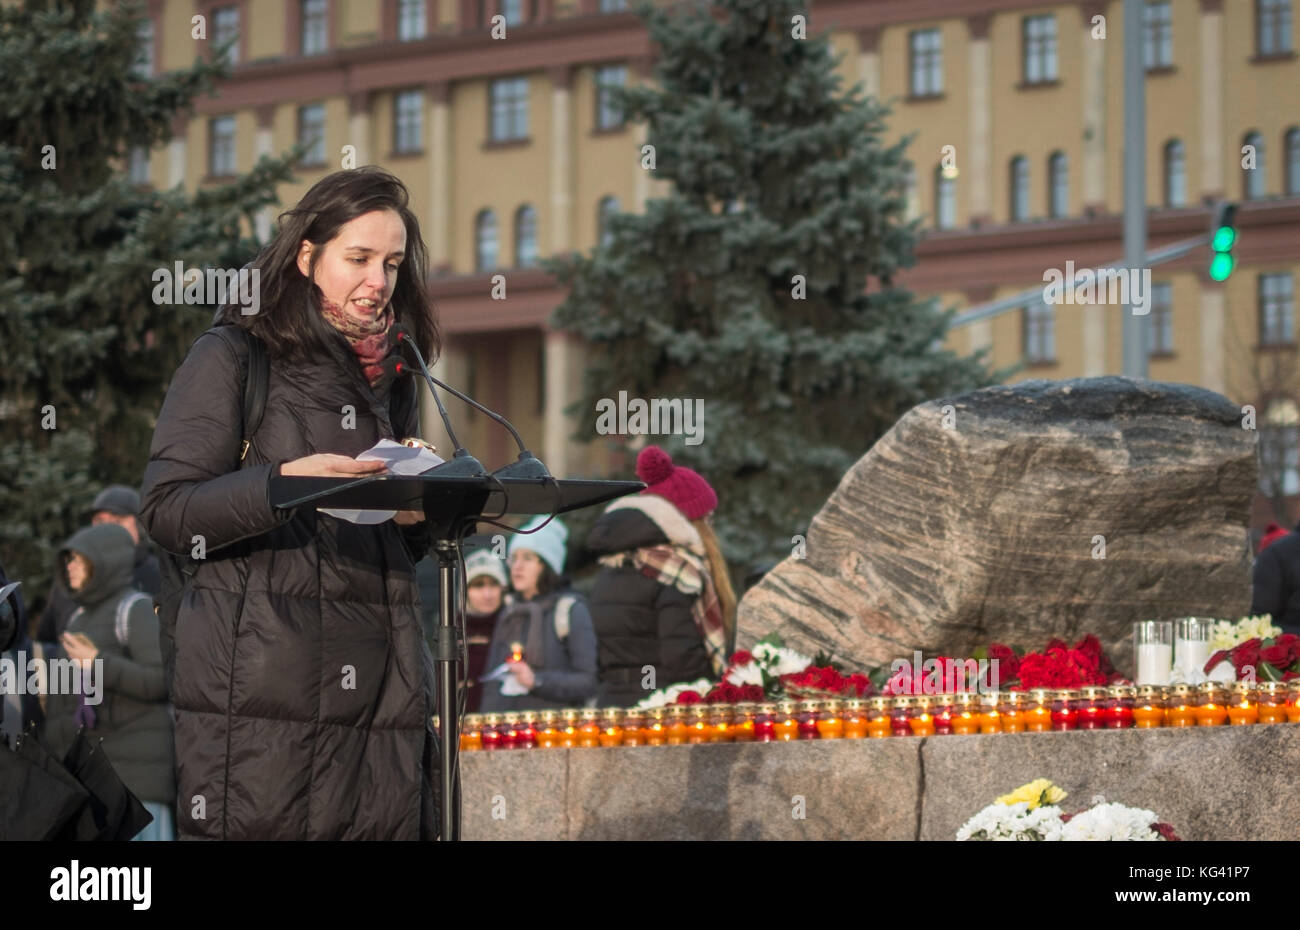 More than 5,000 people took part in a ceremony in Moscow's Lubyanka Square on October 29, 2017, to commemorate the victims of political terror during the Communist era. For twelve hours, people read names of those who were killled or disappeared, especially at the height of Stalinist terror in 1937-1938. In Moscow alone, more than 30,000 people were murdered. Reading the names of the victims has become an annual tradition since 2007. Stock Photo